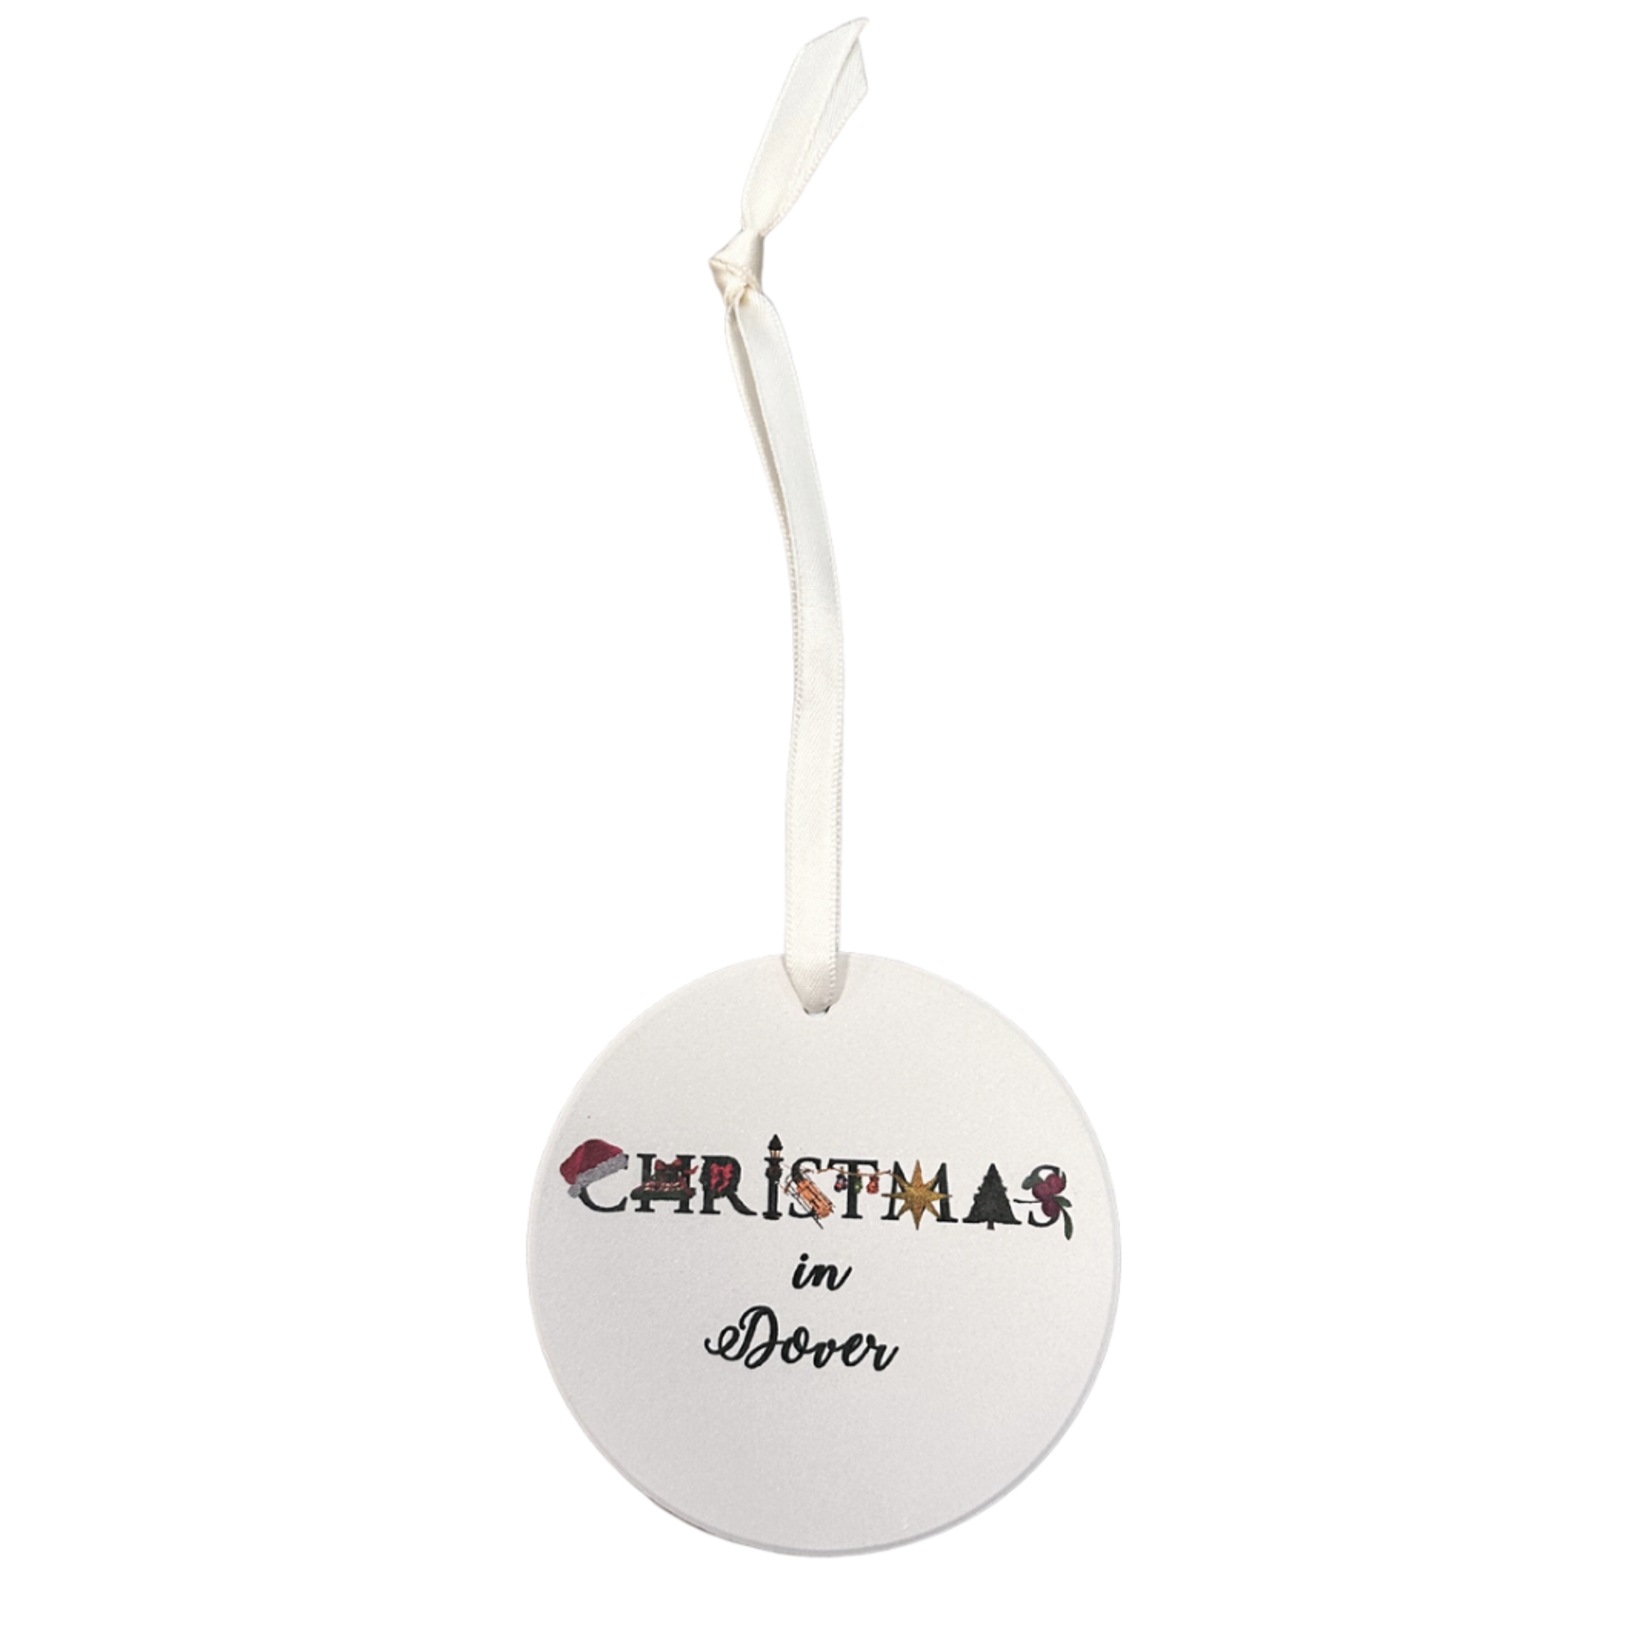 Tina Labadini Designs Tina Labadini Designs - Ornament - Christmas in Dover